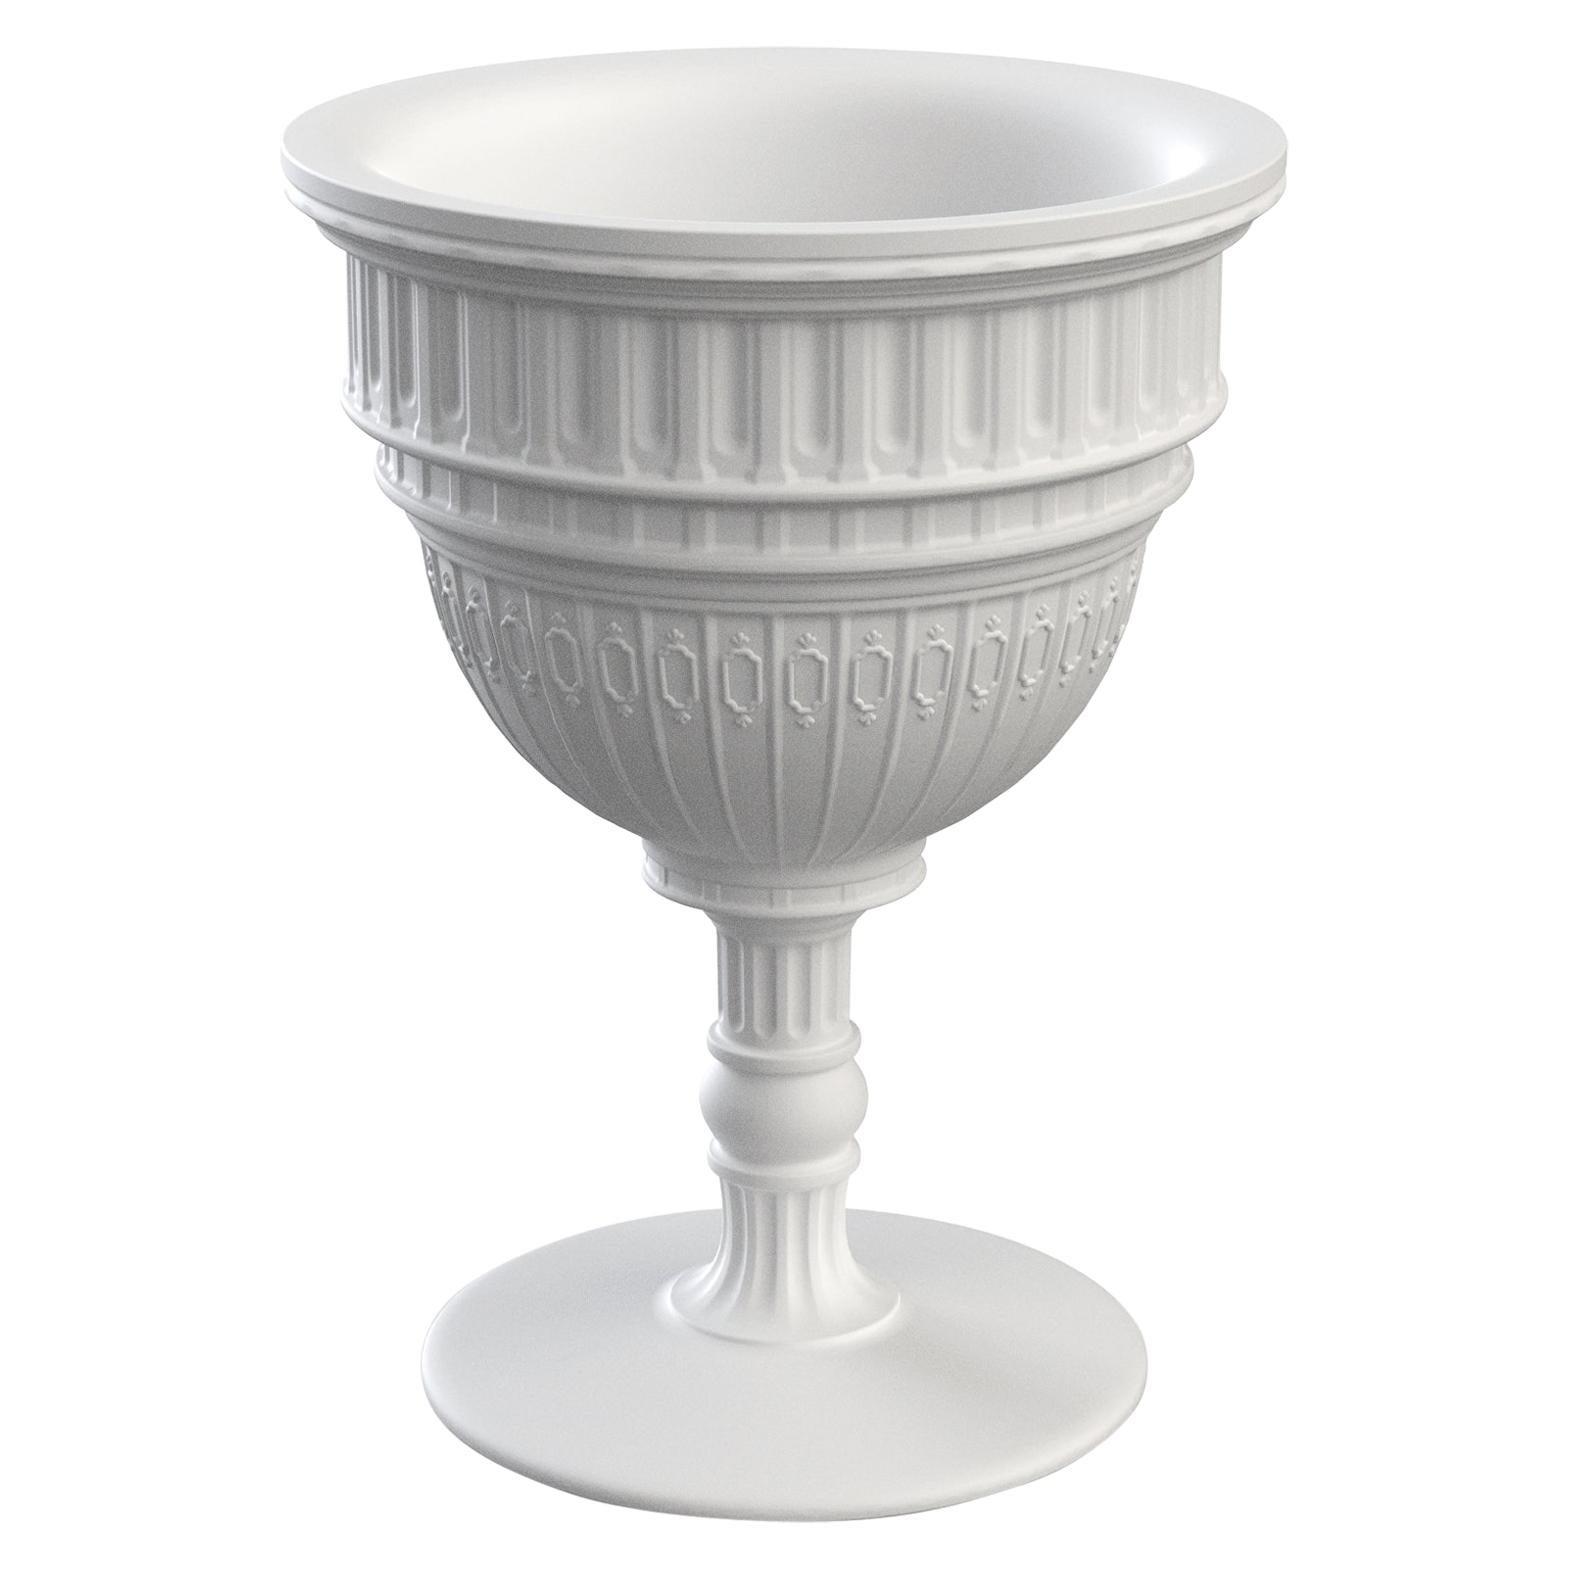 For Sale: White Modern Black or White Mexican Chinese Inspired Planter or Champagne Cooler